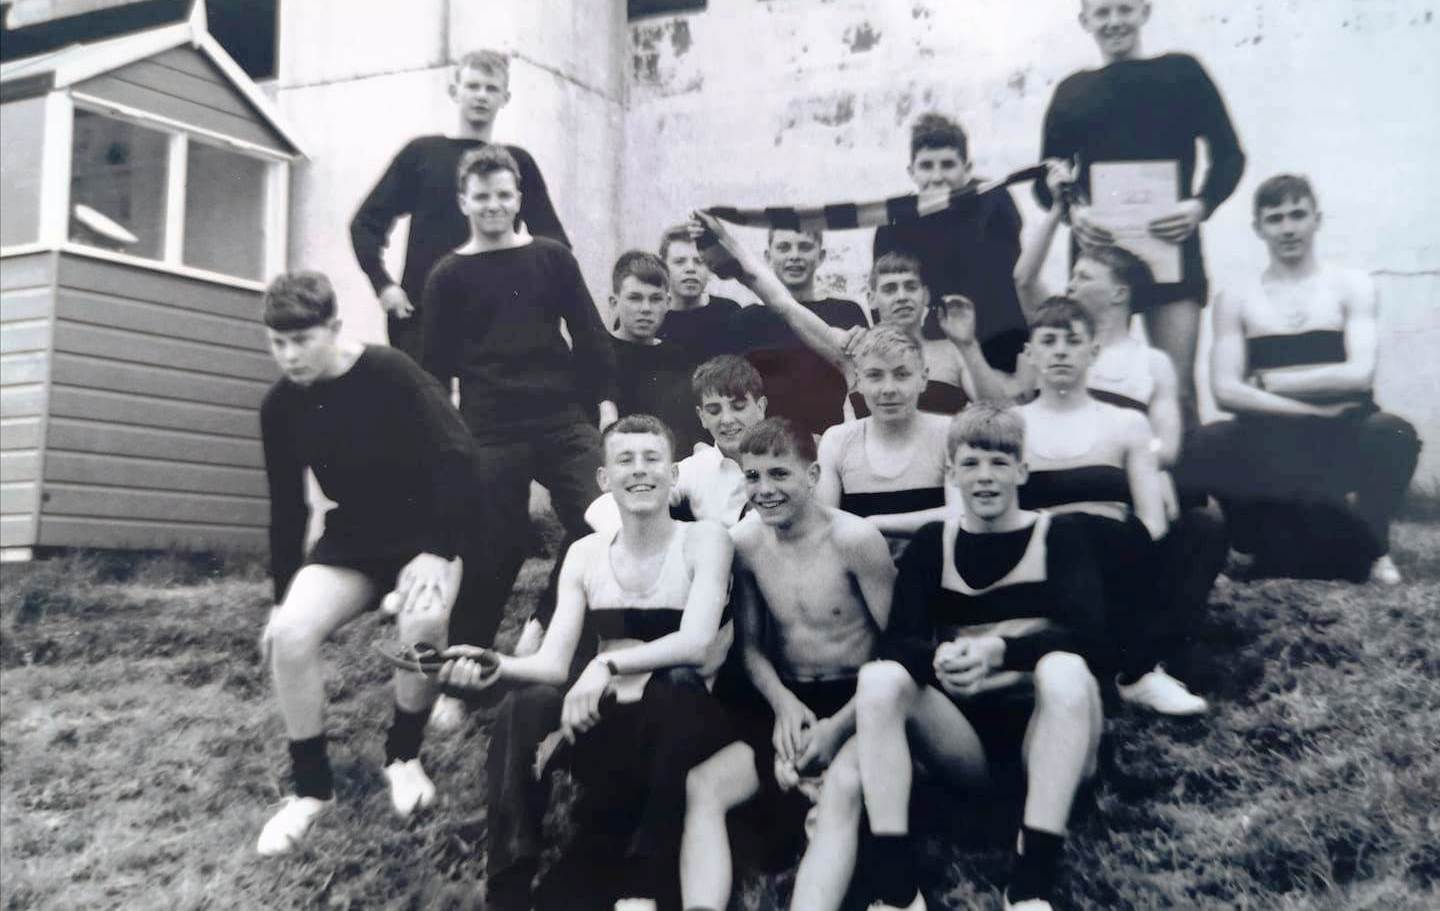 1966, 17TH OCTOBER - NIGEL HUBBARD, 88 RECR., BENBOW, 27 MESS, 181 CLASS, SPORTS  DAY IN 1967.jpg